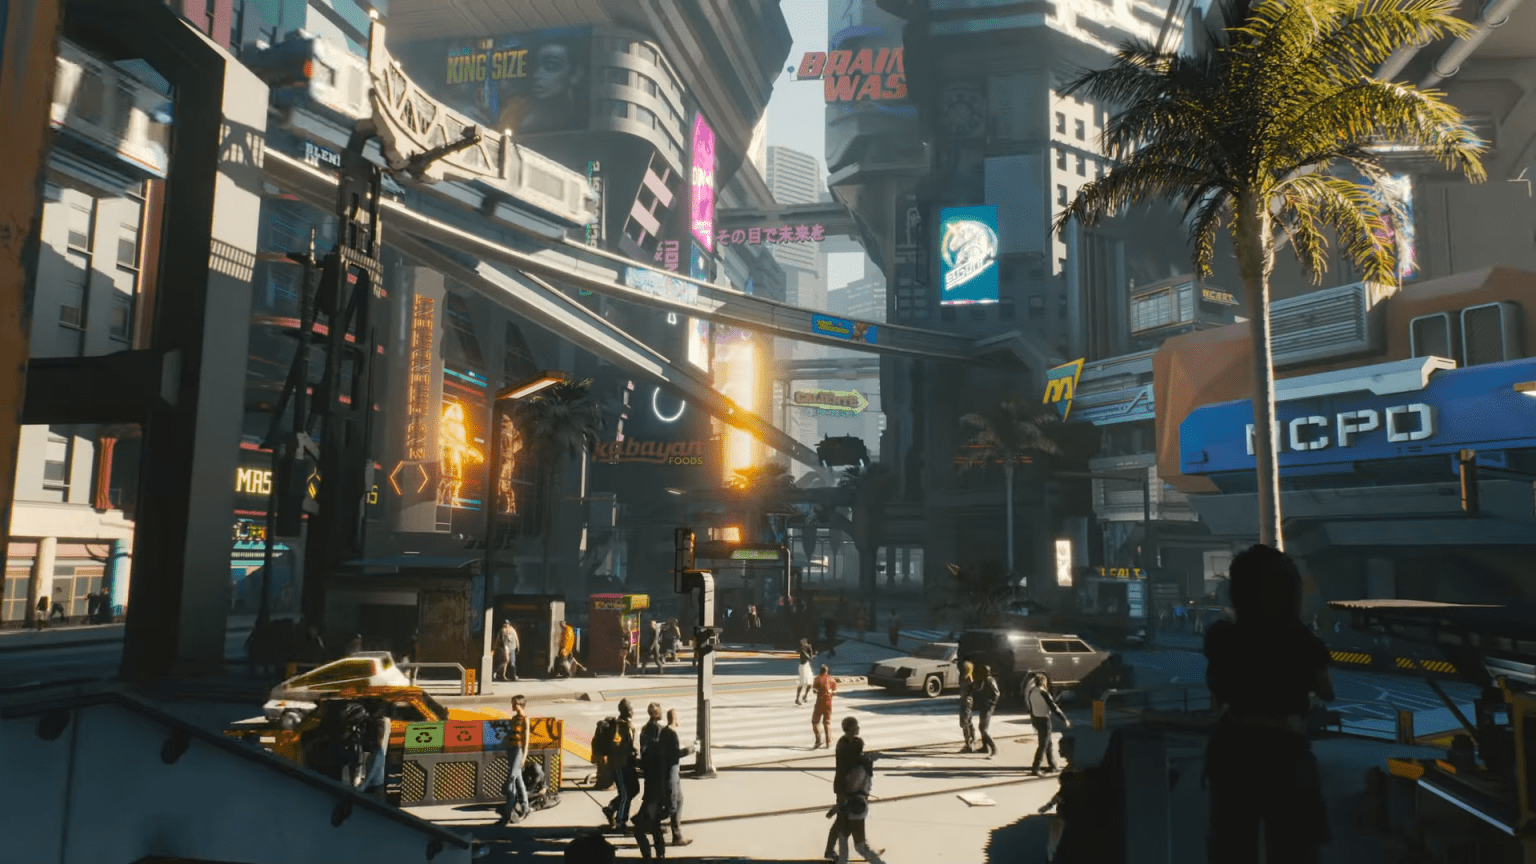 Cyberpunk 2077 Just Received New Concept Art Of Heywood